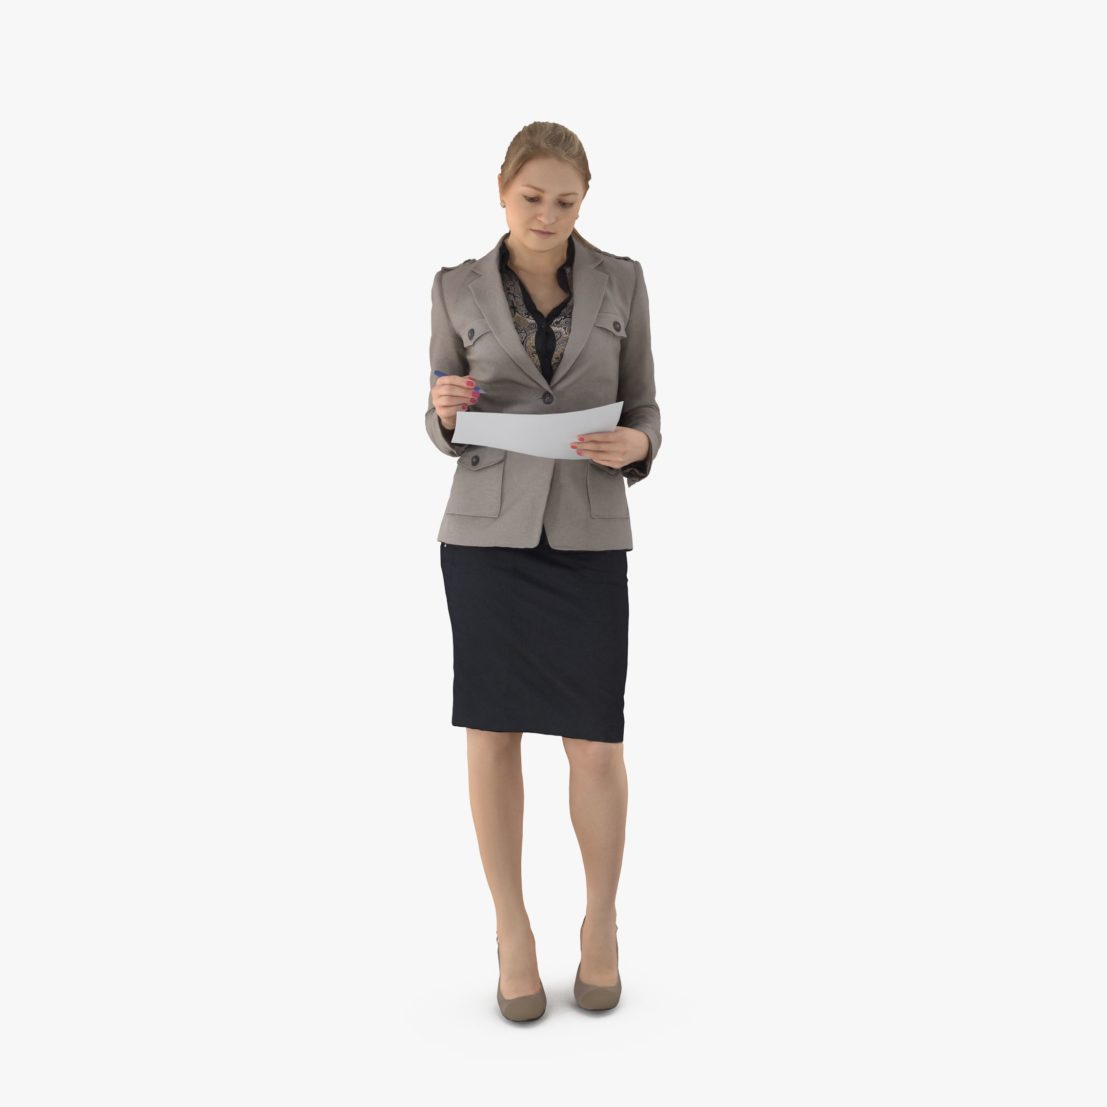 Business Woman Notes 3D Model | 3DTree Scanning Studio